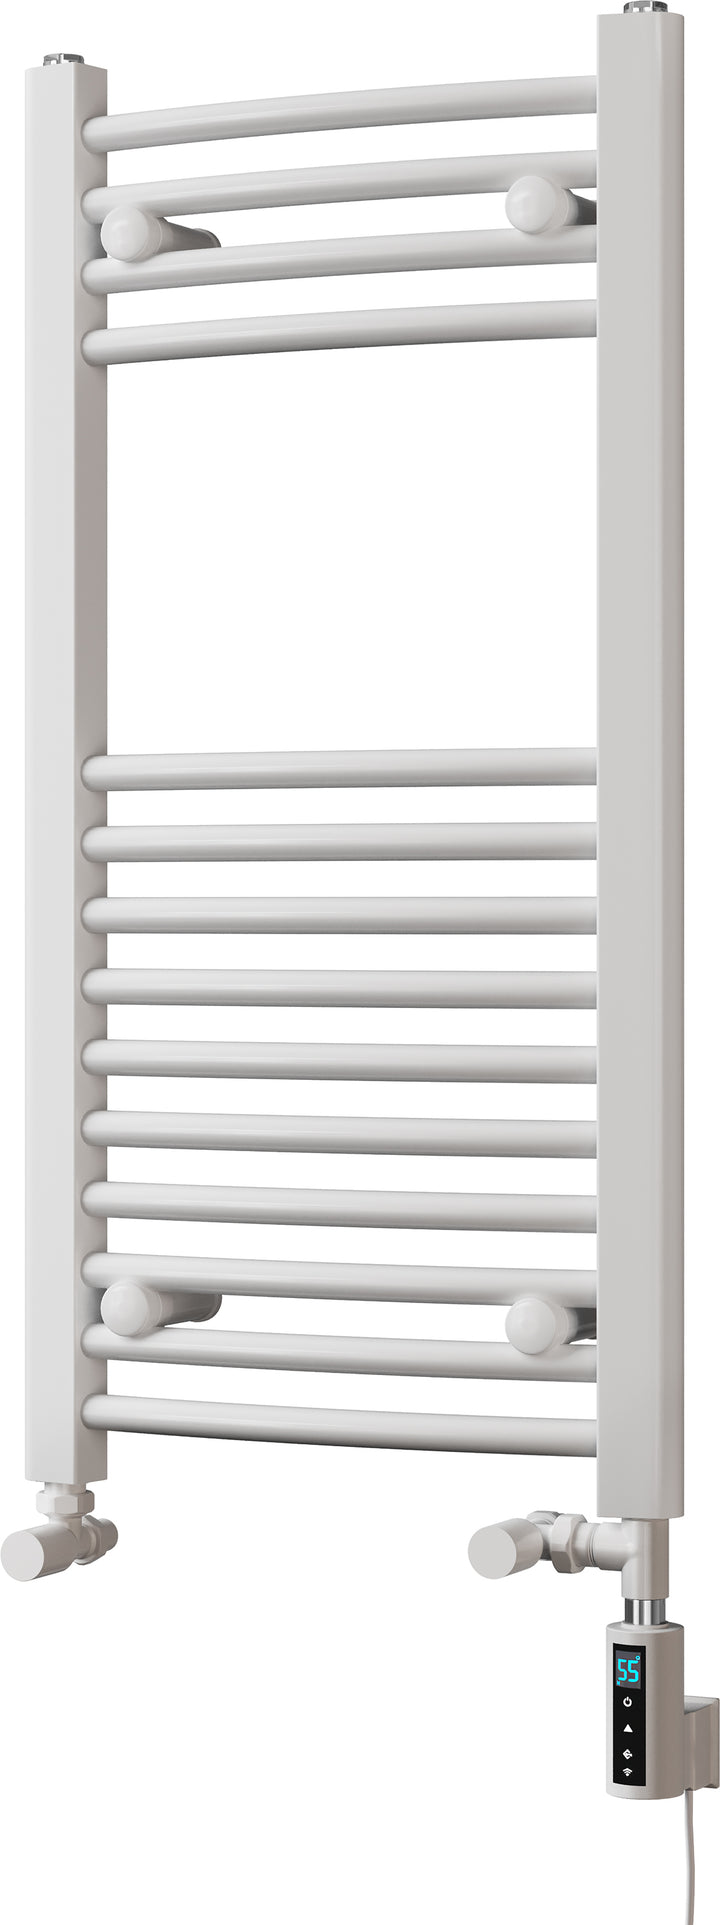 Zennor - White Dual Fuel Towel Rail H800mm x W400mm Thermostatic WIFI - Curved